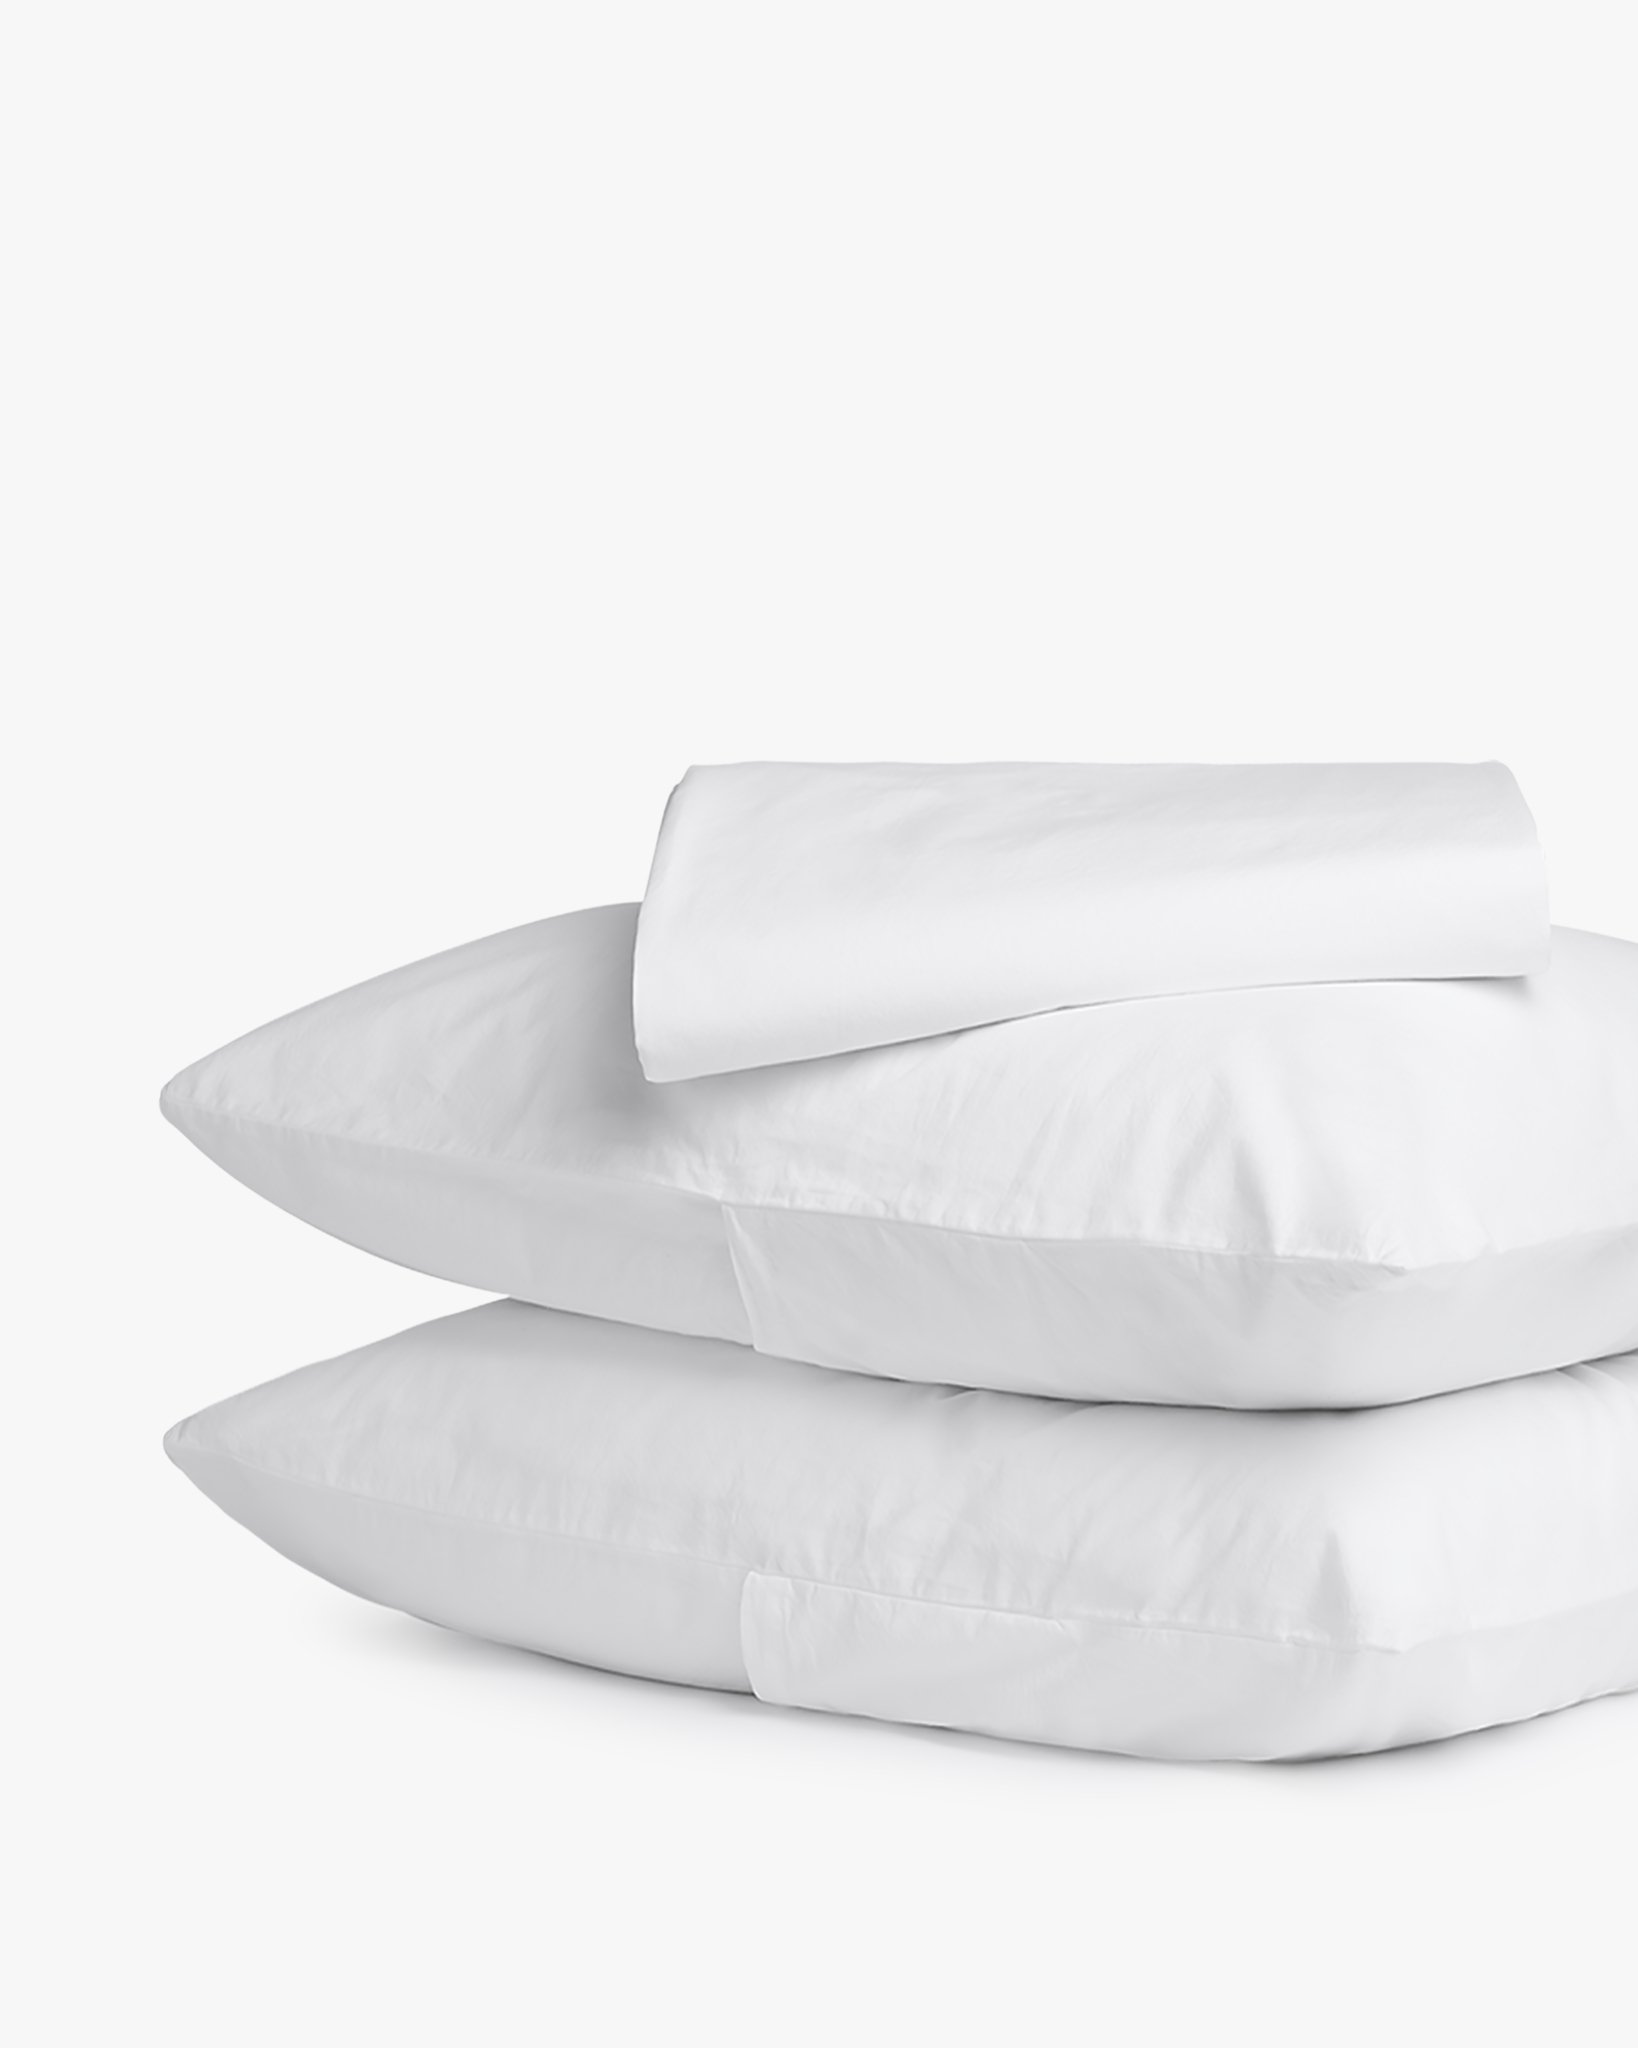 Percale Sheet Sets: King, Queen & Full-Size